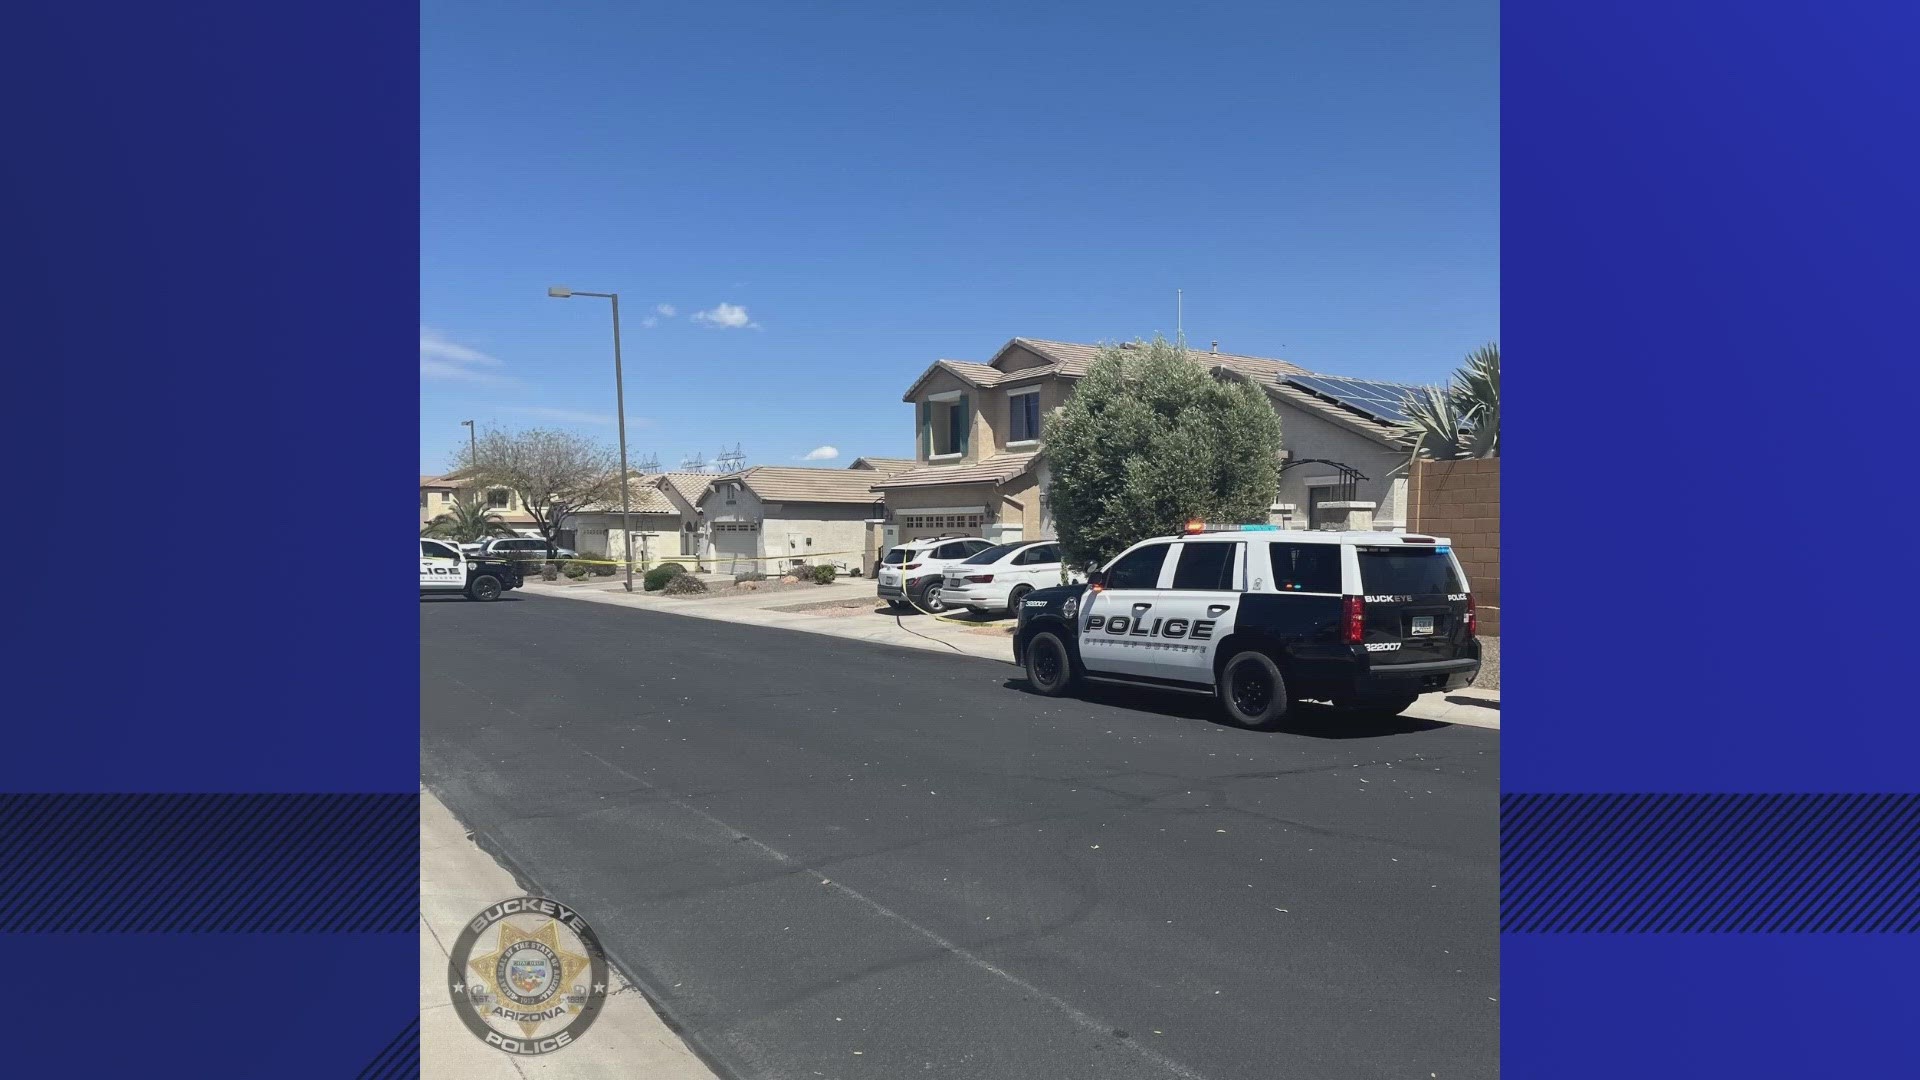 The shooting happened in the town of Buckeye, west of Phoenix, on Saturday when an officer responded to a domestic violence call. Watch the video above for more.